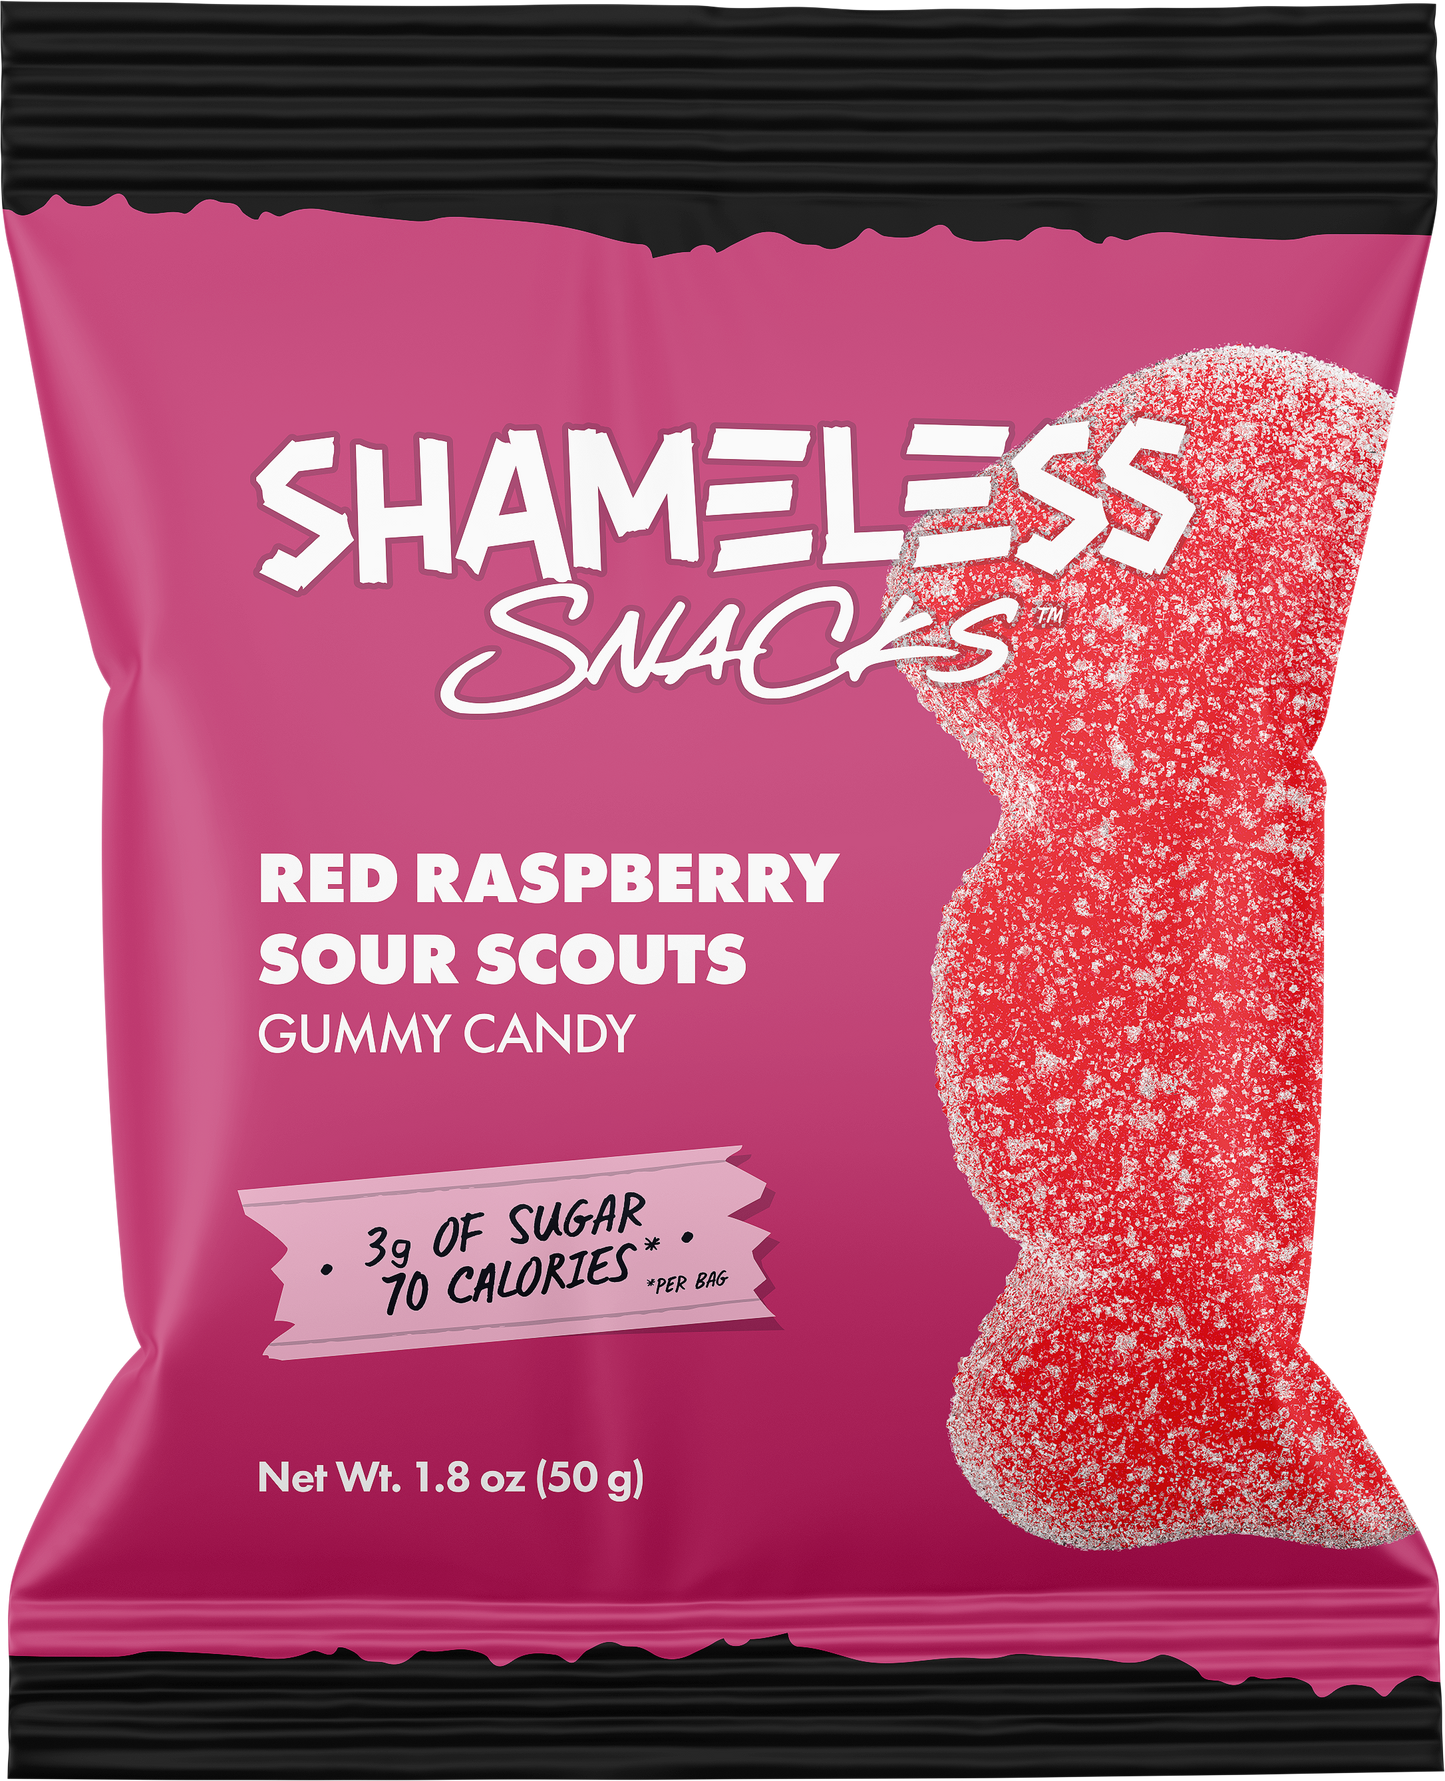 Shameless Snacks Gummy Candy 6box Red Raspberry Sour Scouts.